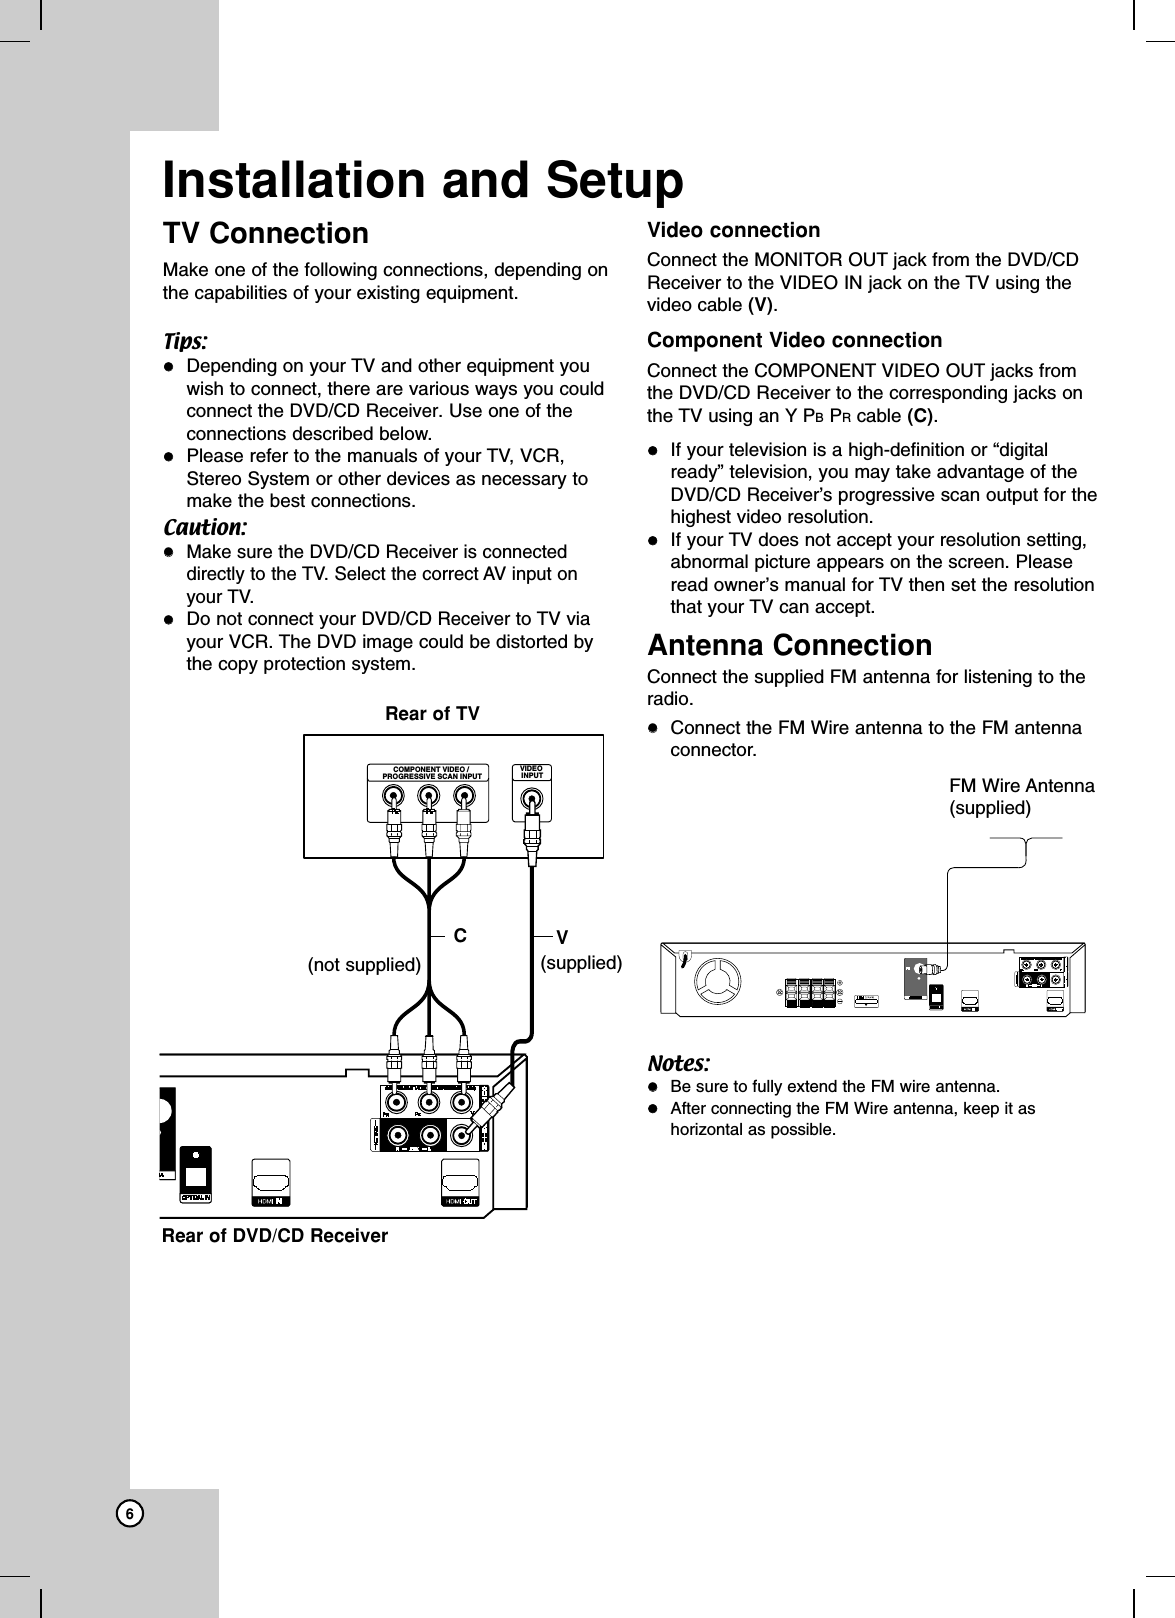 6TV ConnectionMake one of the following connections, depending onthe capabilities of your existing equipment.Tips:Depending on your TV and other equipment youwish to connect, there are various ways you couldconnect the DVD/CD Receiver. Use one of theconnections described below.Please refer to the manuals of your TV, VCR,Stereo System or other devices as necessary tomake the best connections.Caution:Make sure the DVD/CD Receiver is connecteddirectly to the TV. Select the correct AV input onyour TV.Do not connect your DVD/CD Receiverto TV viayour VCR. The DVD image could be distorted bythe copy protection system. Video connection Connect the MONITOR OUT jack from the DVD/CDReceiver to the VIDEO IN jack on the TV using thevideo cable (V).Component Video connectionConnect the COMPONENT VIDEO OUT jacks fromthe DVD/CD Receiver to the corresponding jacks onthe TV using an Y PBPRcable (C).If your television is a high-definition or “digitalready” television, you may take advantage of theDVD/CD Receiver’s progressive scan output for thehighest video resolution. If your TV does not accept your resolution setting,abnormal picture appears on the screen. Pleaseread owner’s manual for TV then set the resolutionthat your TV can accept. Antenna ConnectionConnect the supplied FM antenna for listening to theradio.Connect the FM Wire antenna to the FM antennaconnector.Notes:Be sure to fully extend the FM wire antenna.After connecting the FM Wire antenna, keep it ashorizontal as possible.Installation and SetupYCOMPONENT VIDEO / PROGRESSIVE SCAN INPUTVIDEO INPUTRear of DVD/CD ReceiverRear of TVVC(supplied)(not supplied)FM Wire Antenna(supplied)